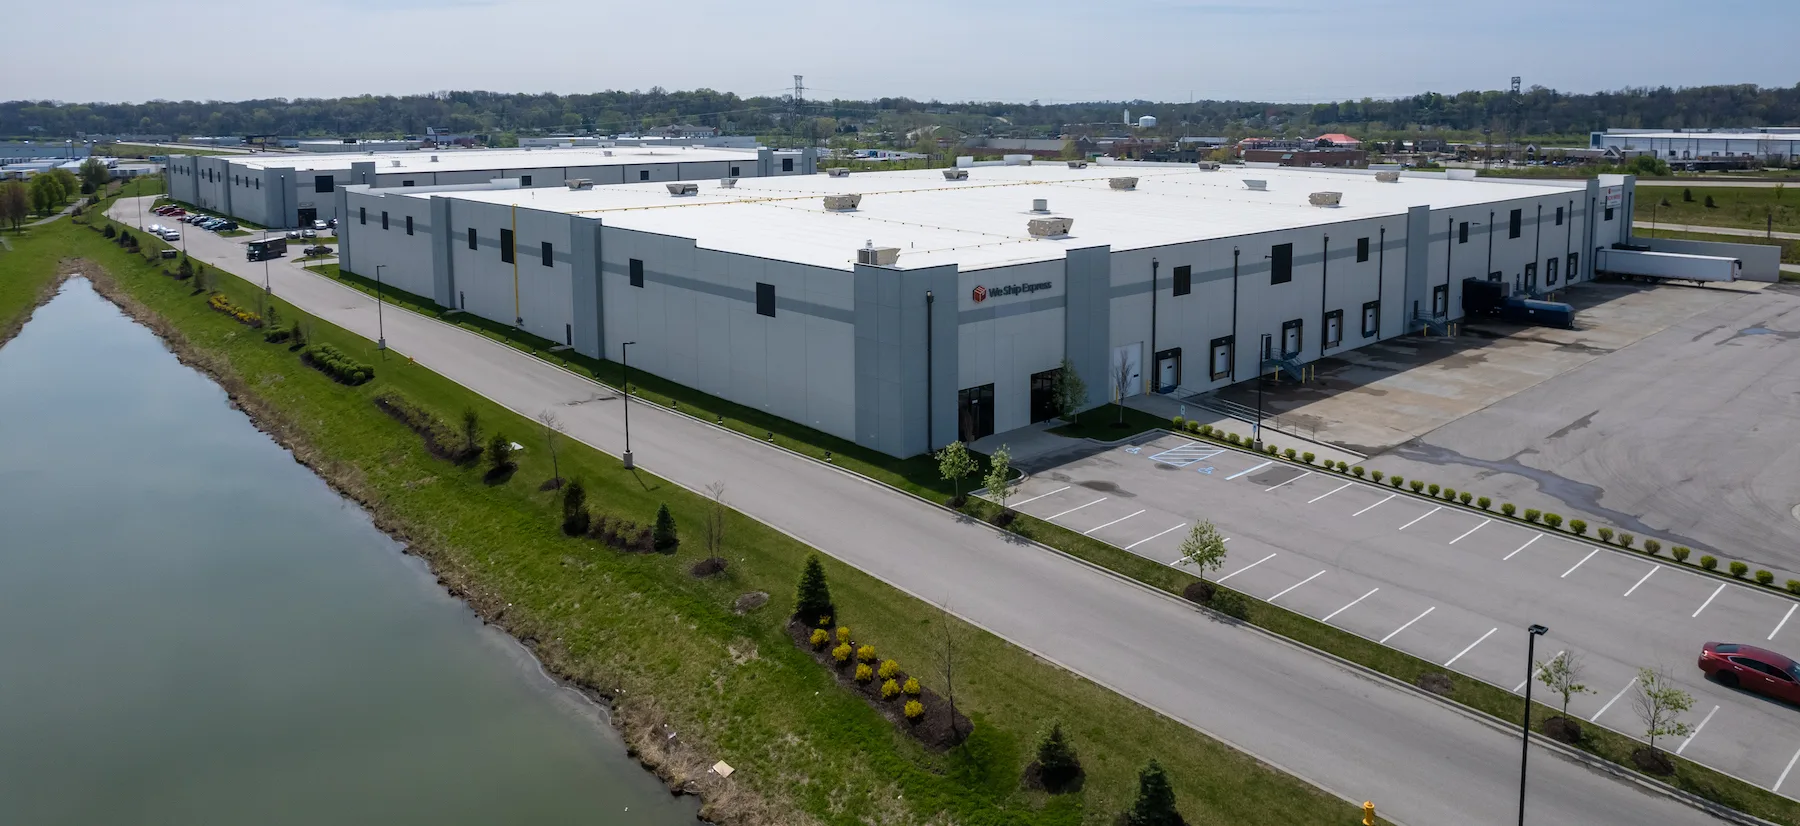 Ariel view of a large WeShip warehouse facility